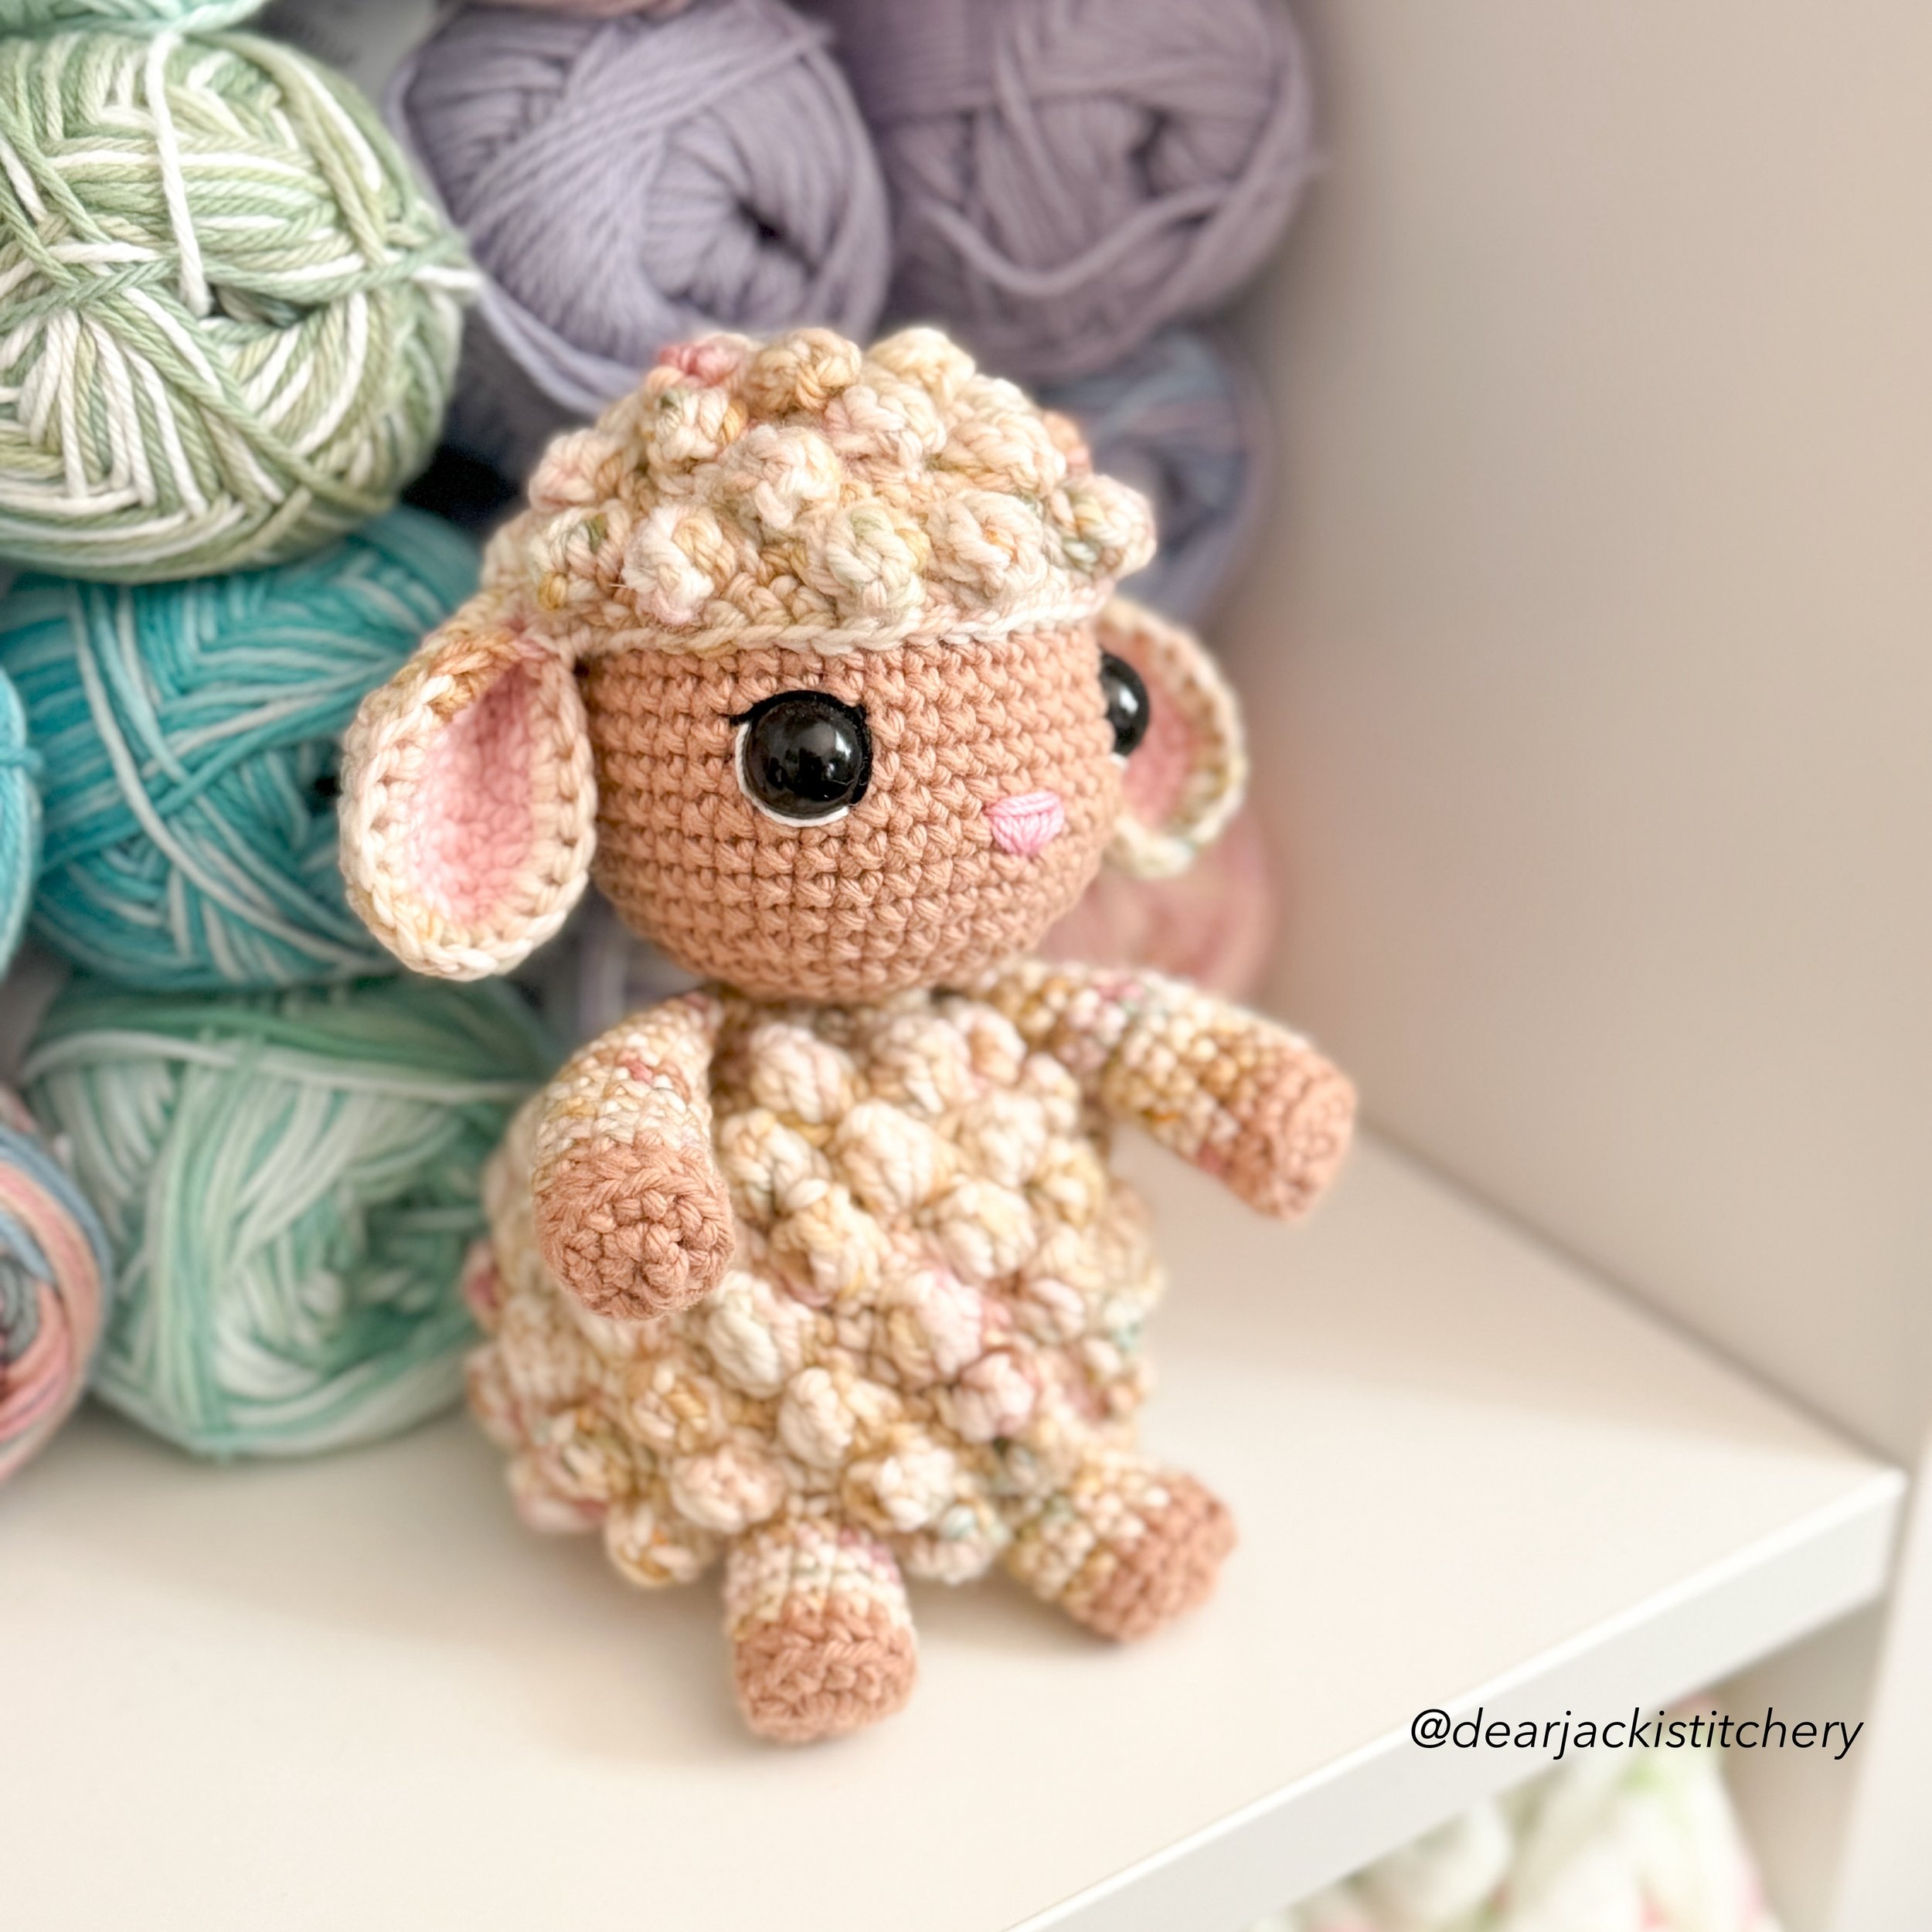 When I see cute sheep, all I think about is yarn. Fingerling yarn, DK weight, roving, hand dyed, even visually pleasing hanks hanging on a peg wall of a yarn festival. That&rsquo;s not so terrible. Plus, sheep are adorable pooping machines.❤️ 

Tilli